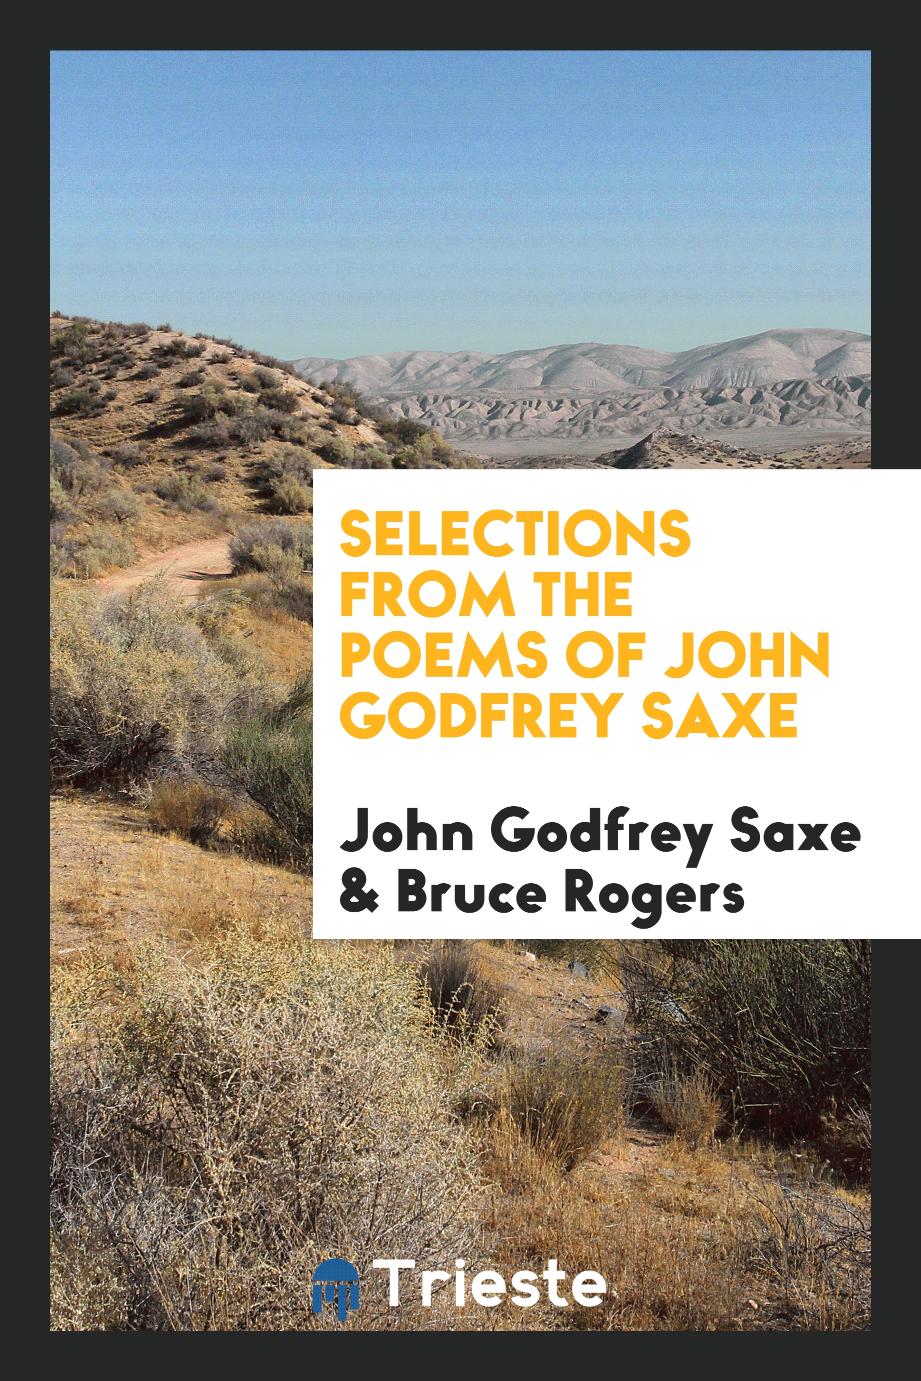 Selections from the poems of John Godfrey Saxe